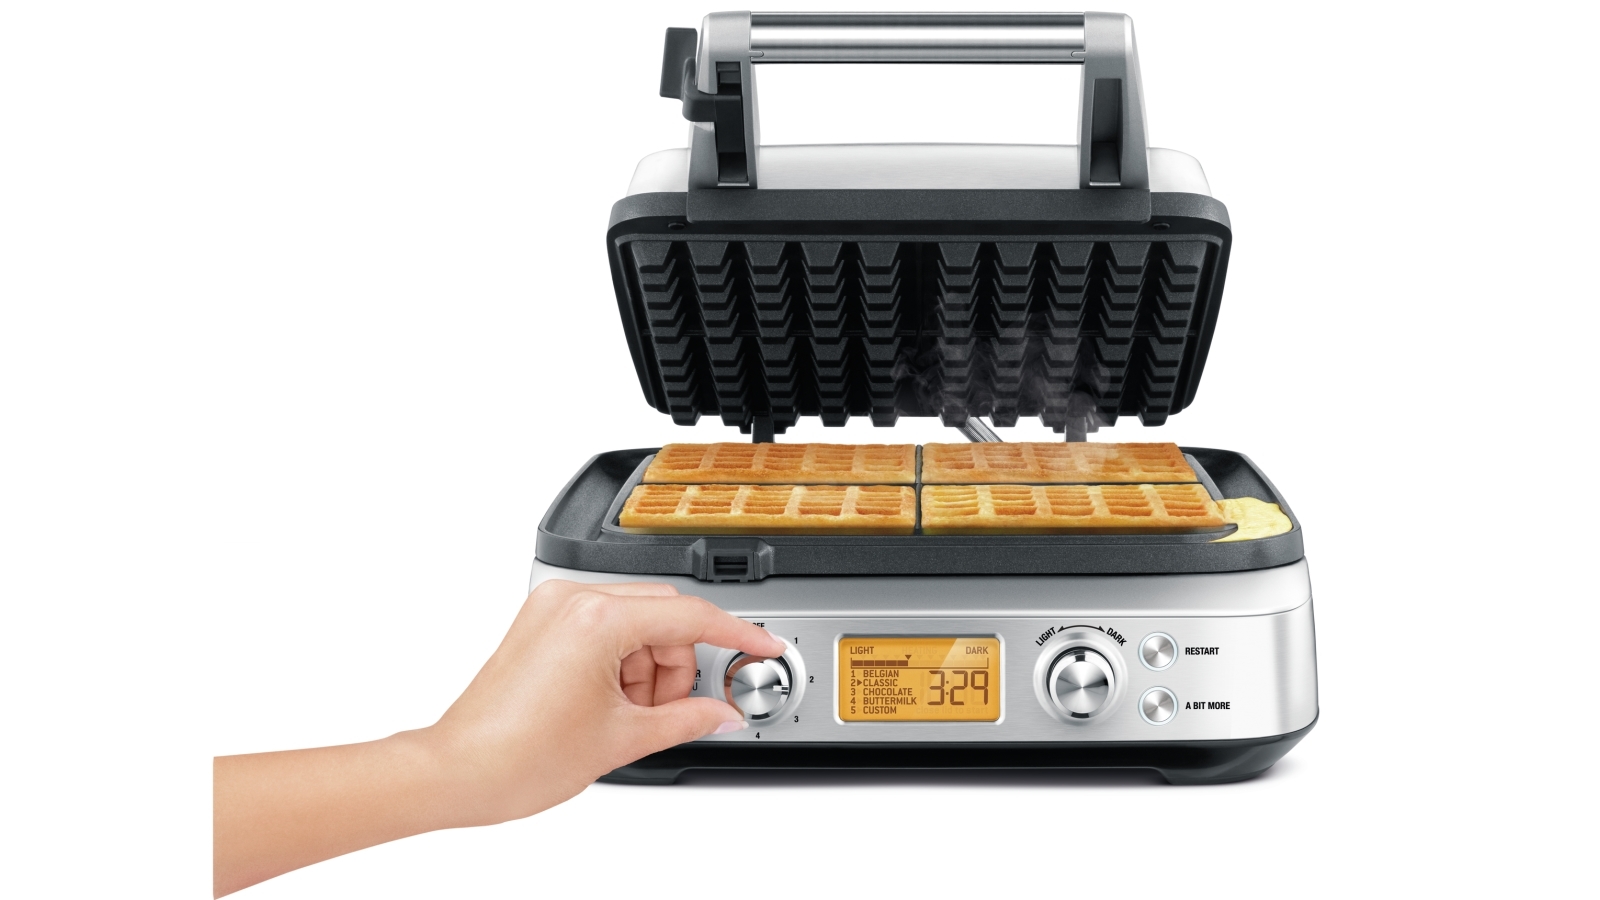 Belgian Waffle Maker, AICOOK 180° Flip Waffle Maker 1000W  With Double-Sided Heating for Fluffy Golden Waffles, Non-Stick Plates, Adjustable Temperature Cont 